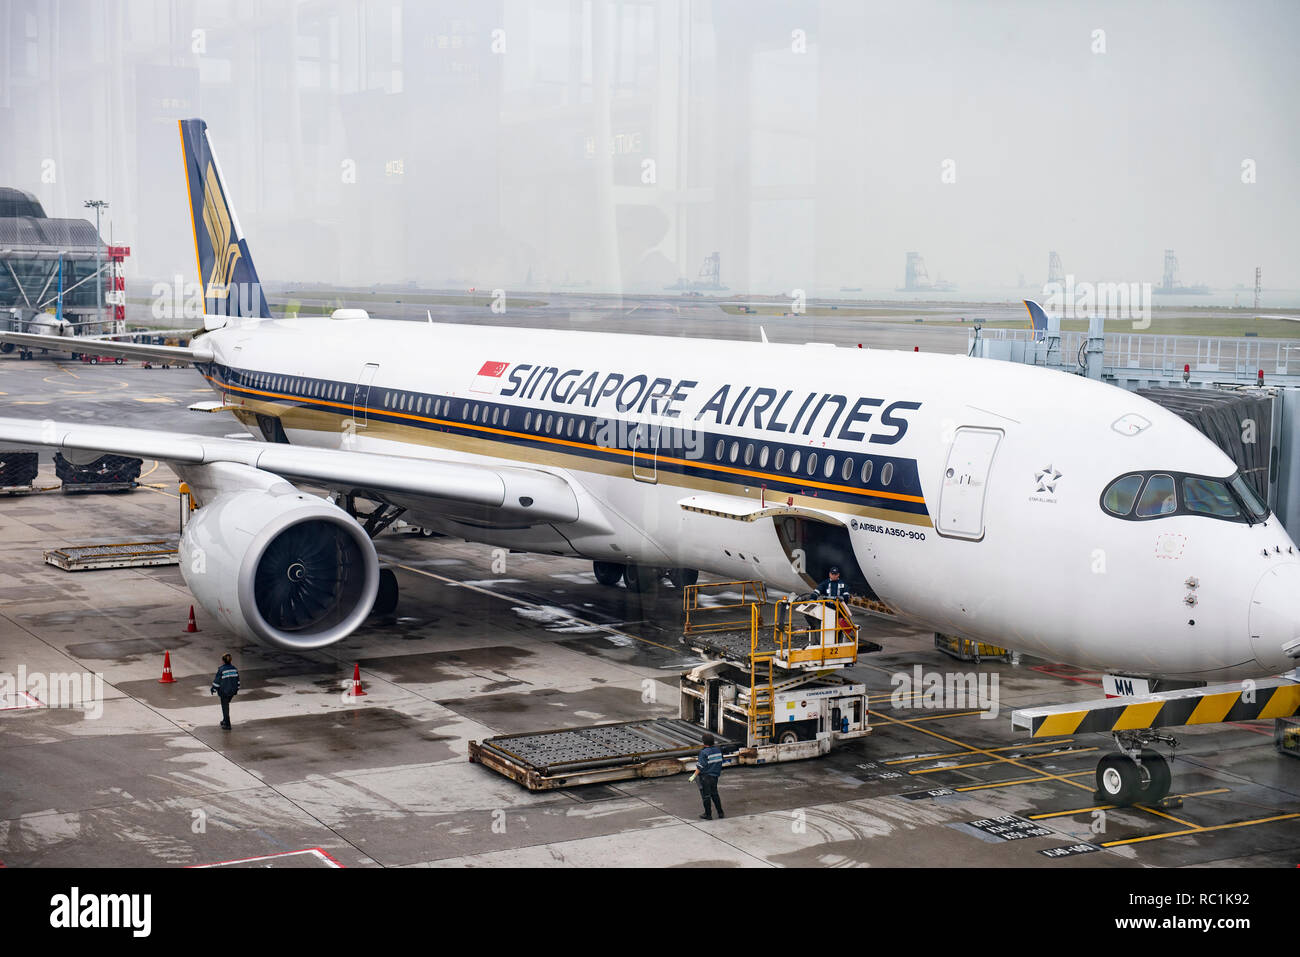 Singapore Airlines plane, Singapore's flag carrier, is seen at Hong Kong International Airport runway. Stock Photo